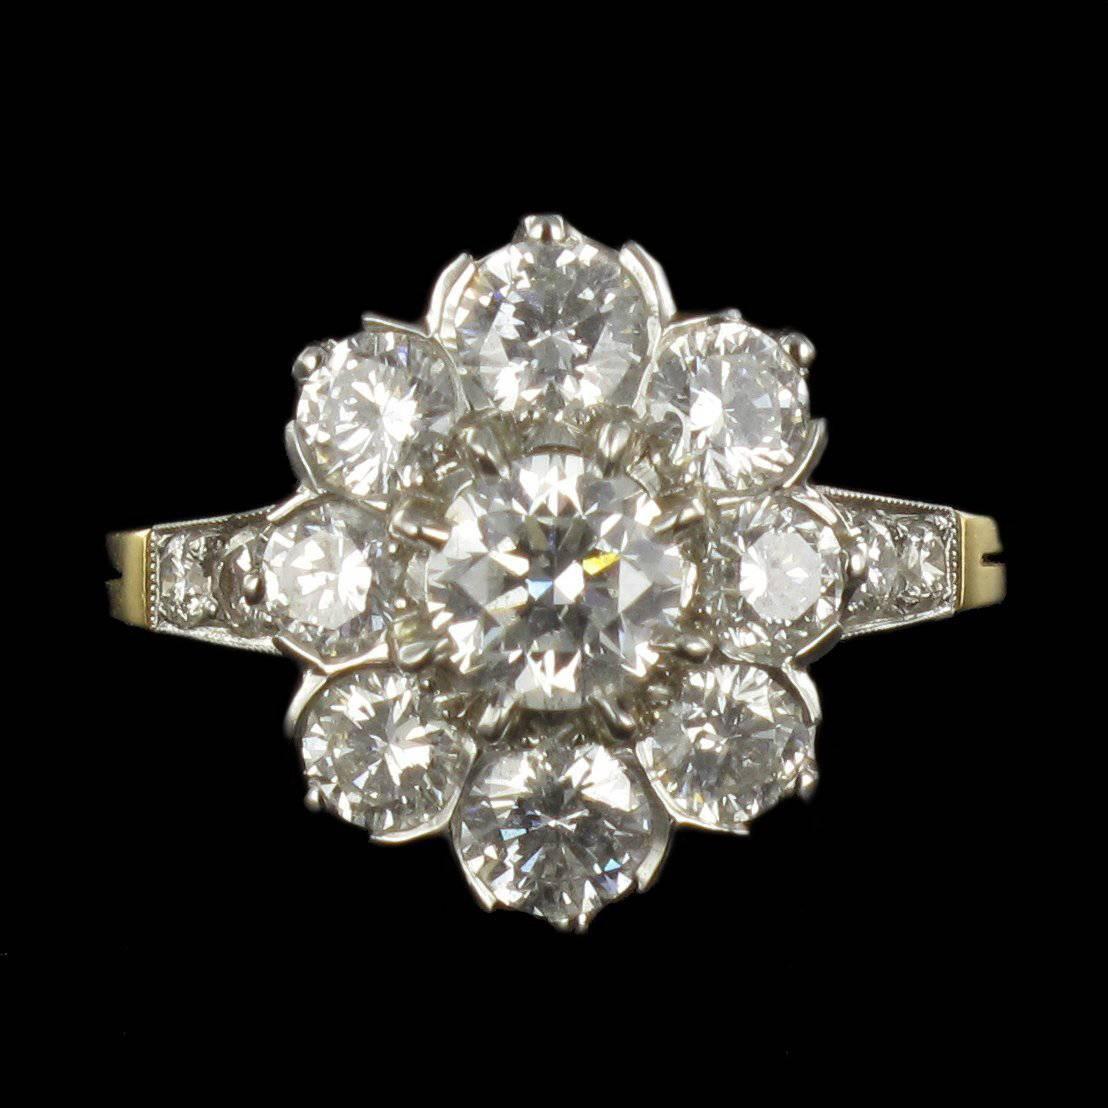 Ring in platinium and 18 carat yellow gold, dog and eagle heads hallmarks. 

This delightful Daisy style ring features a claw set central brilliant cut diamond surrounded by 8 other claw set diamonds. At each shoulder, at the beginning of the ring